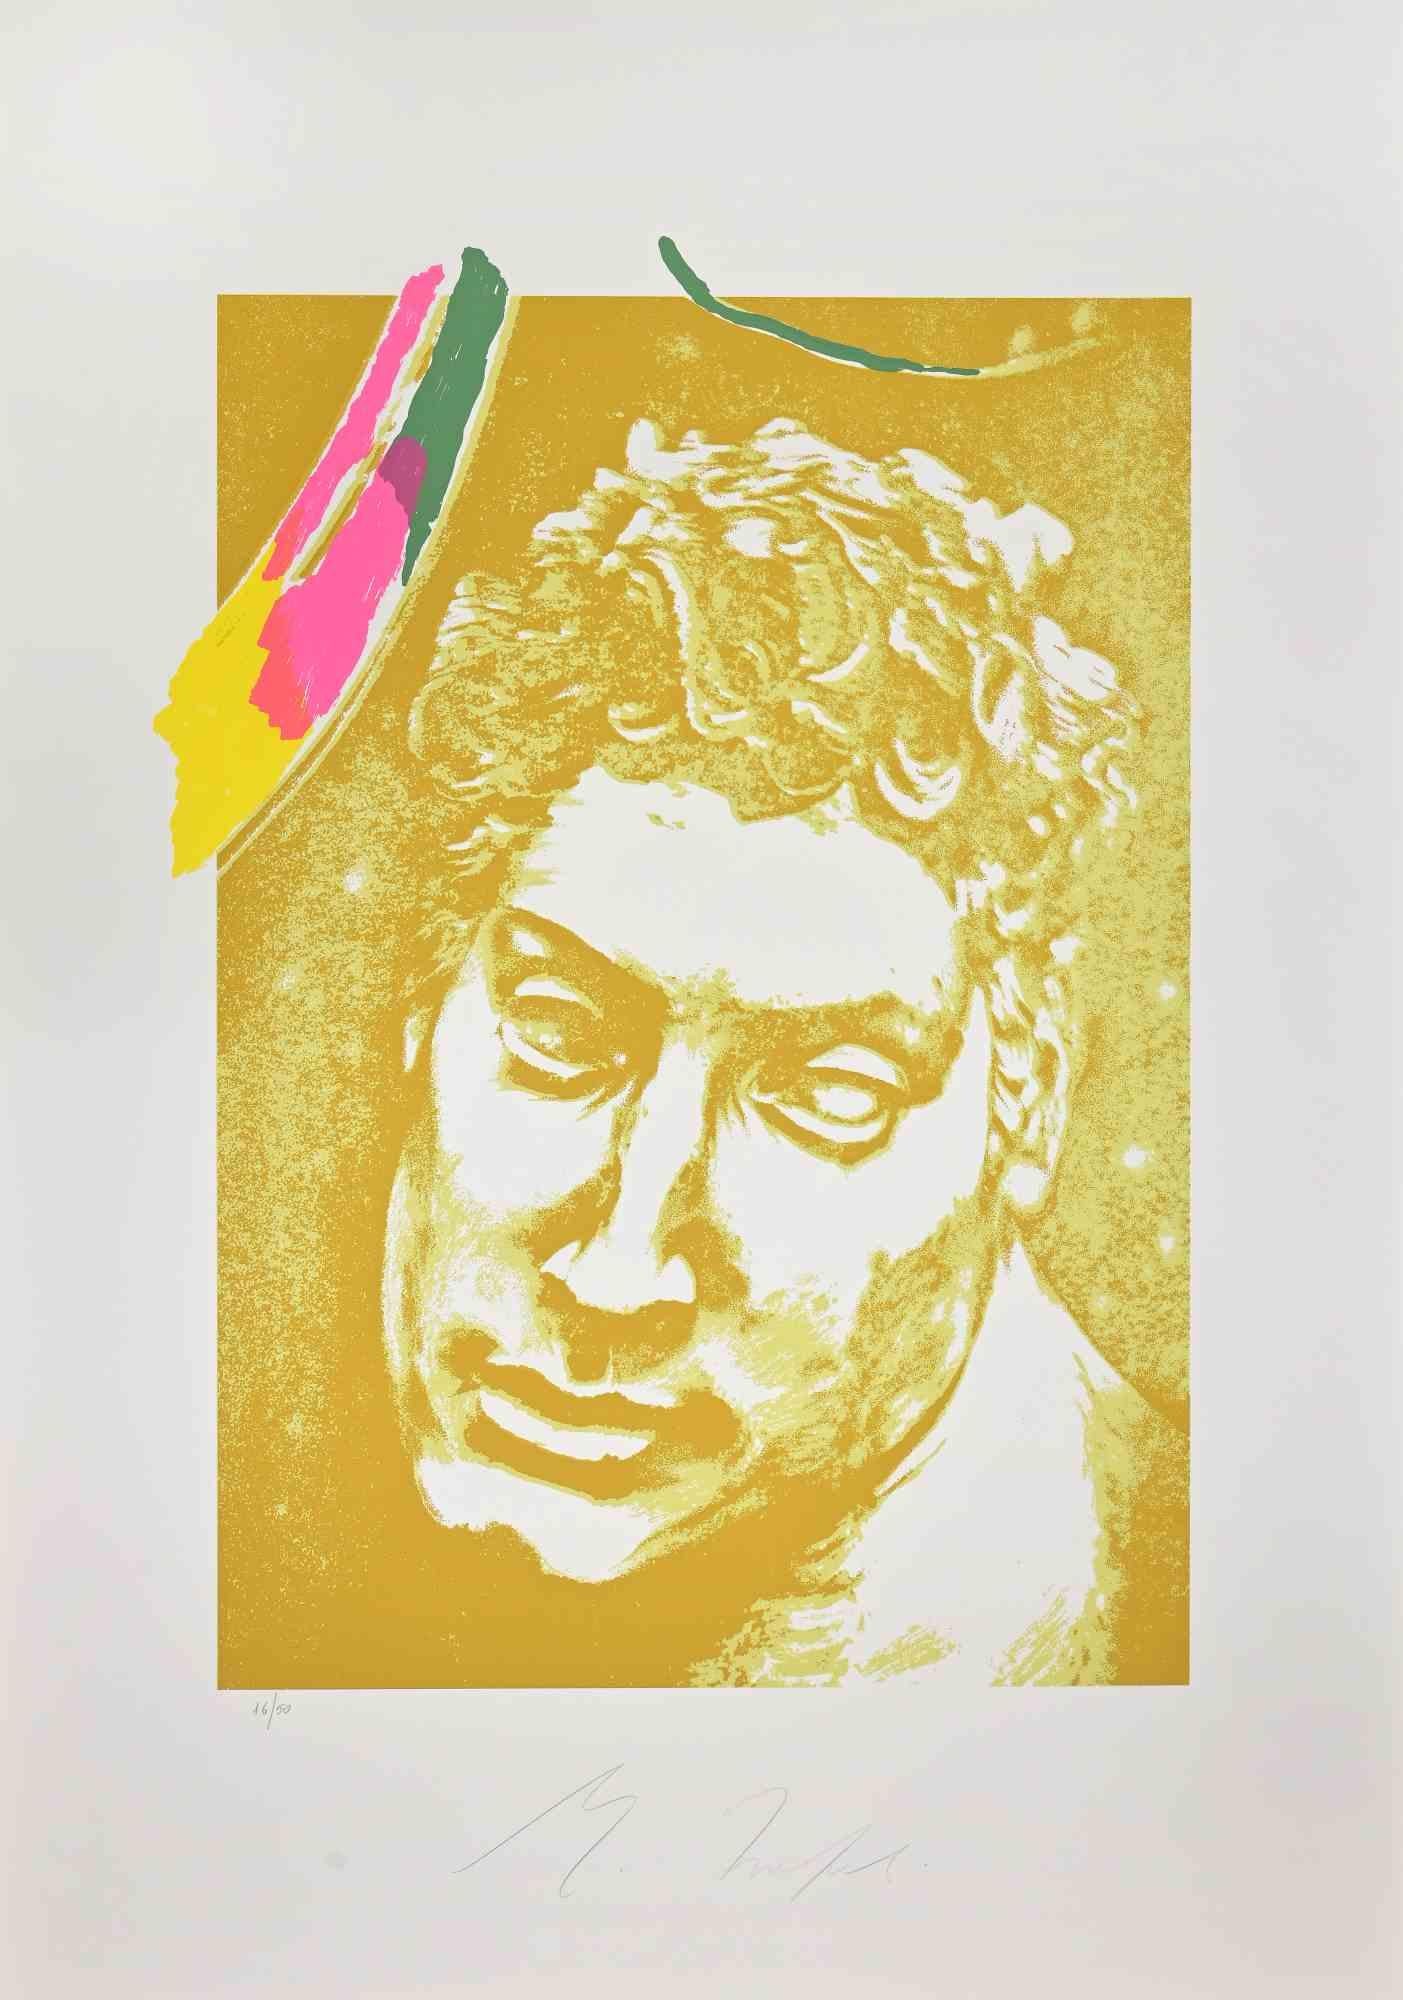 Portraits is a Lithograph realized by Mino Trafeli in 1980s. 

Edition 16/50.

Hand signed.

Good conditions.

 

Mino Trafeli (Volterra, December 29, 1922 - Volterra, August 9, 2018) was an Italian sculptor and partisan.

Fundamental to his